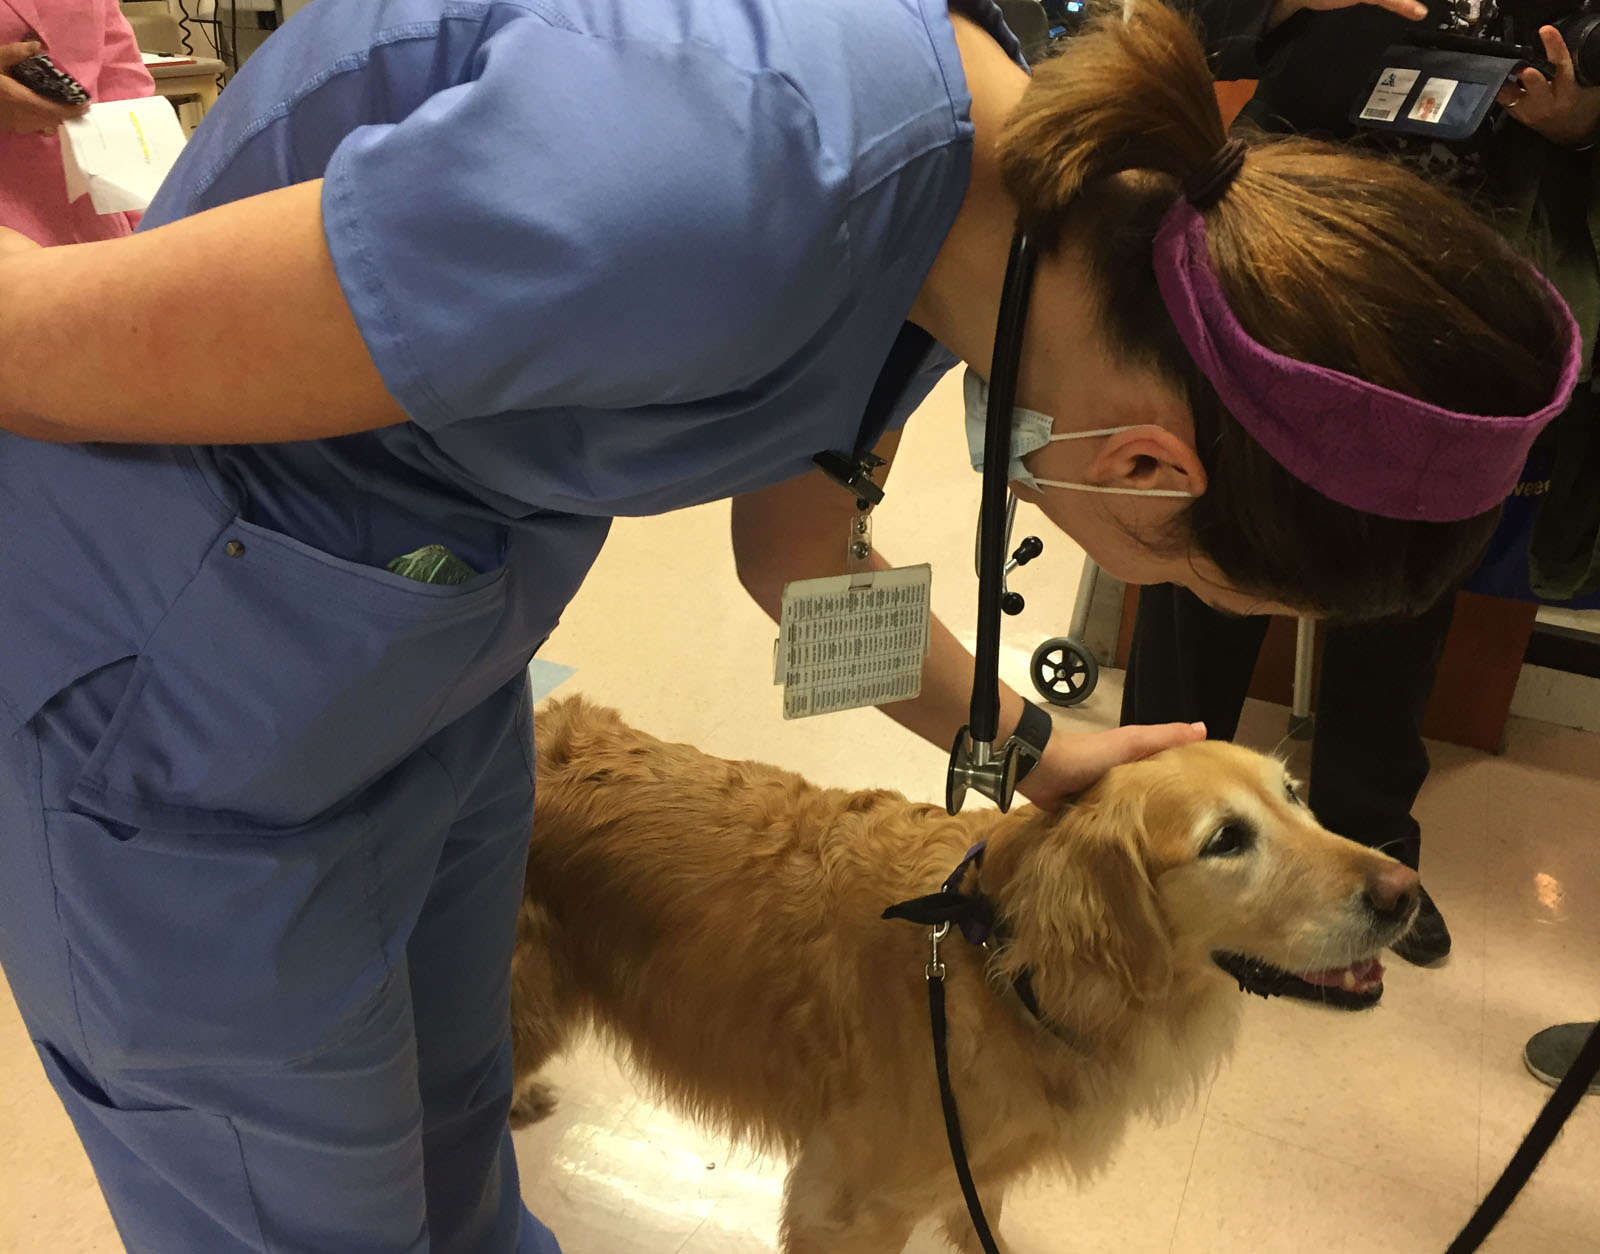 When MedStar Washington Hospital Center asked its nurses what they wanted for National Nurses Week, they asked for visits by therapy dogs. (WTOP/Michelle Basch)